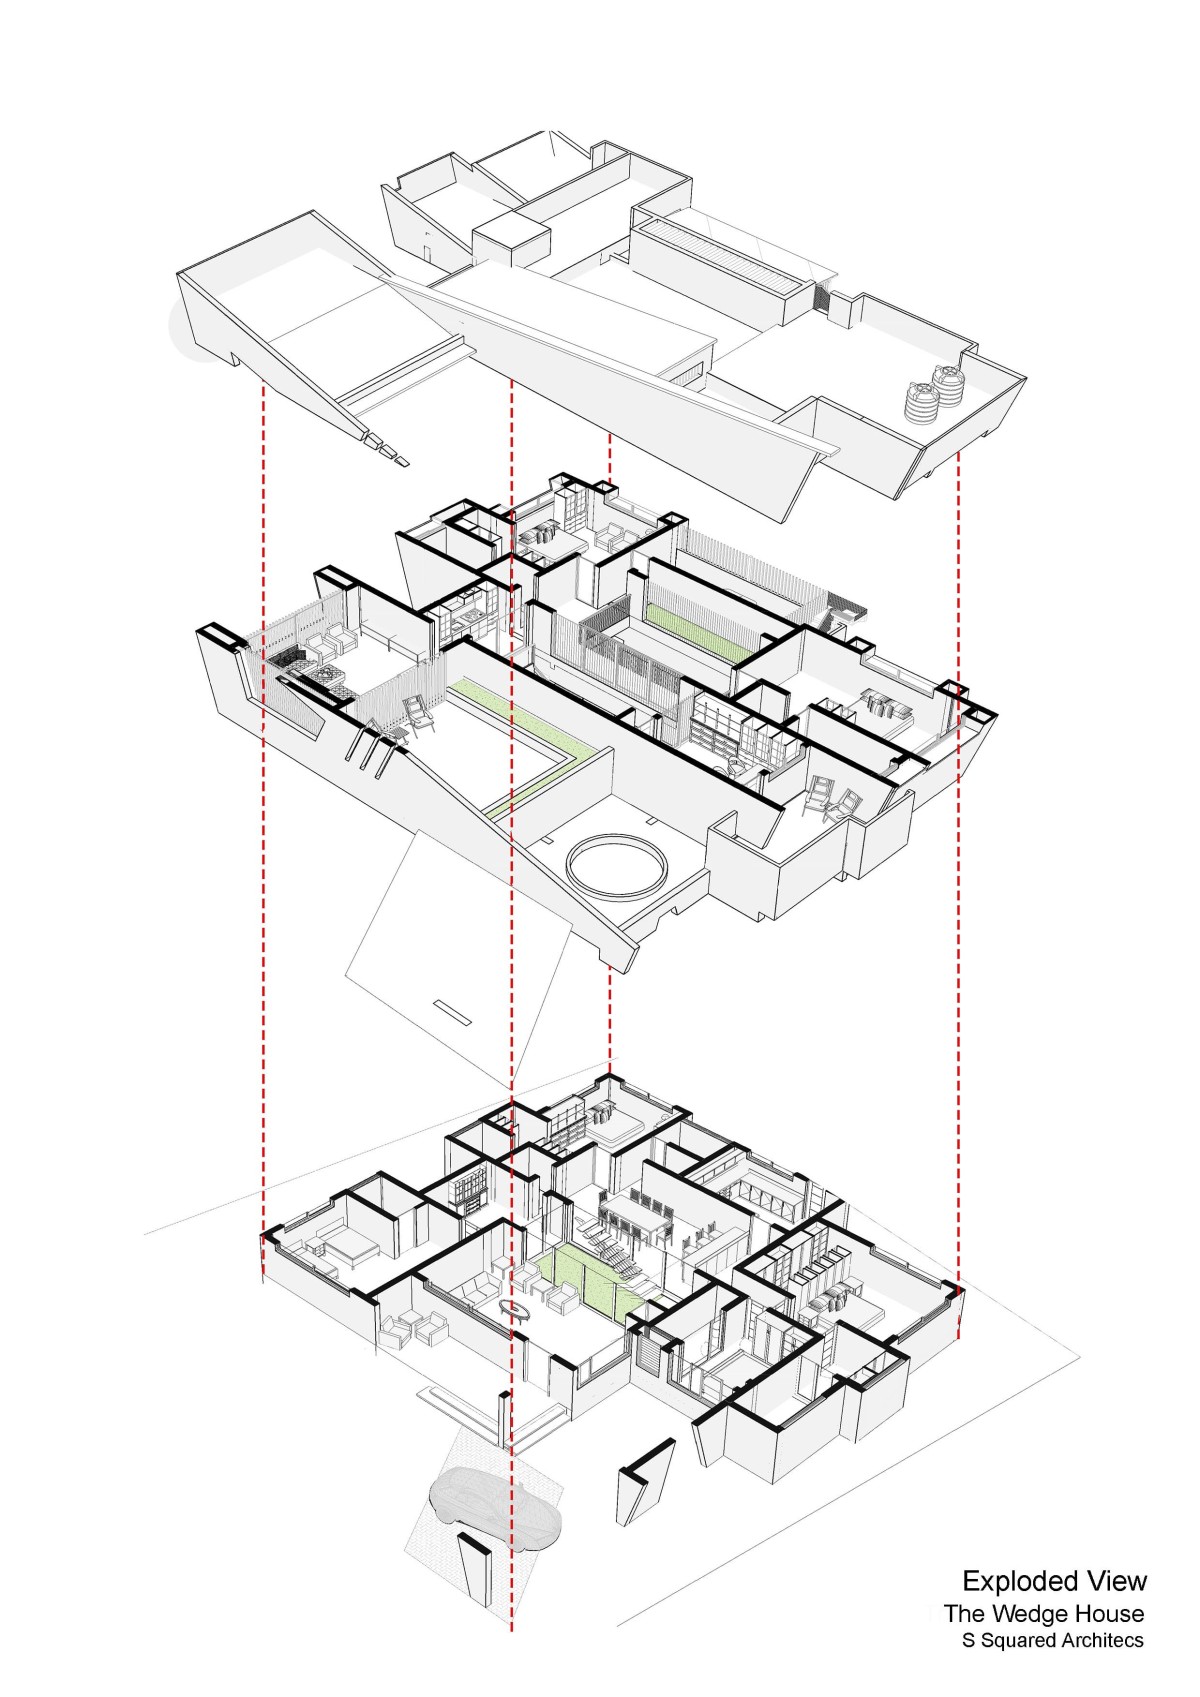 Isometric exploded view of the Wedge House